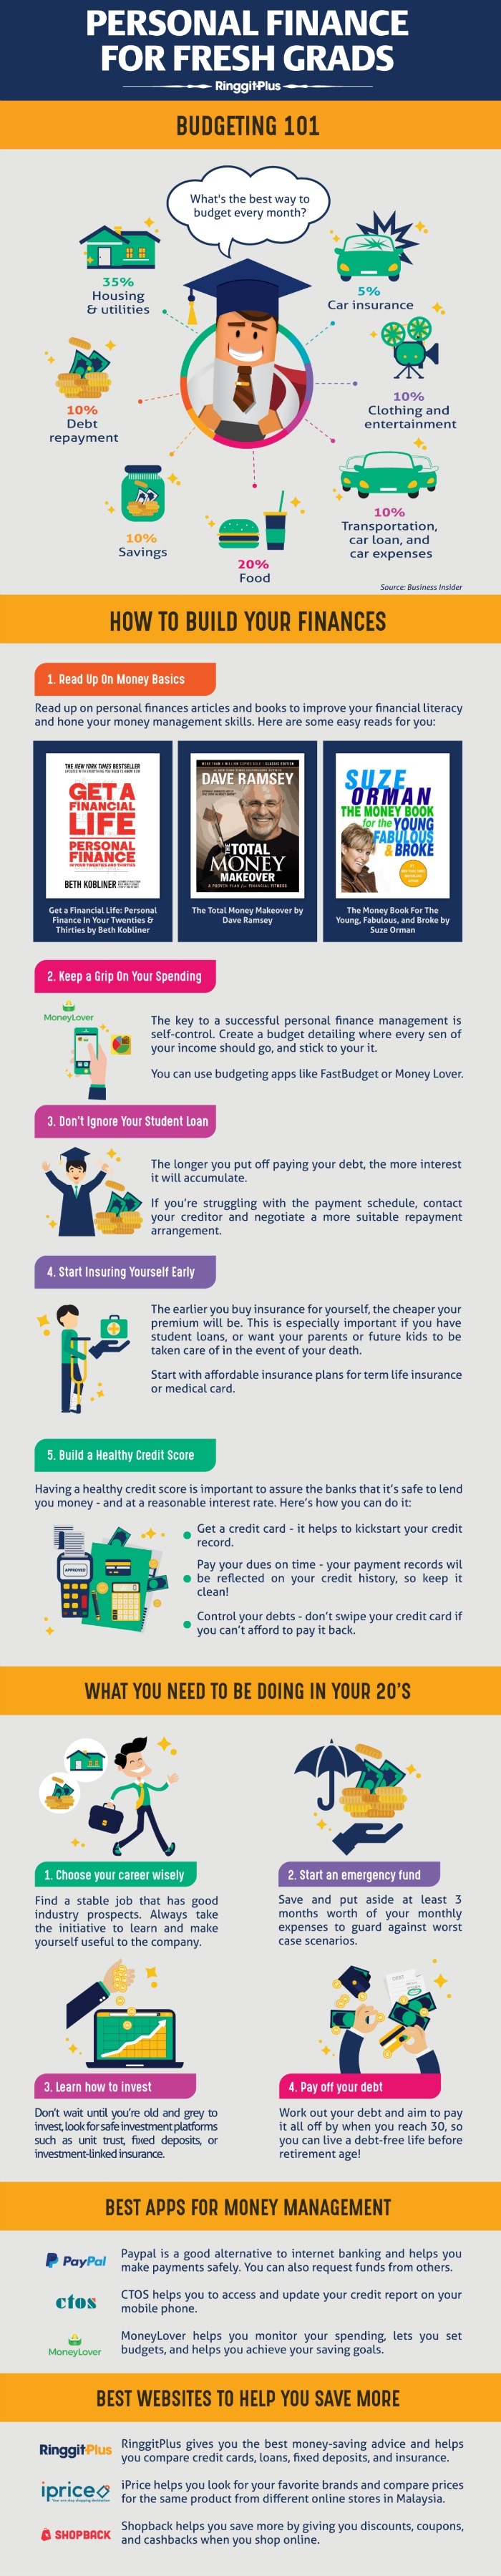 The Ultimate Financial Tips For Fresh Grads